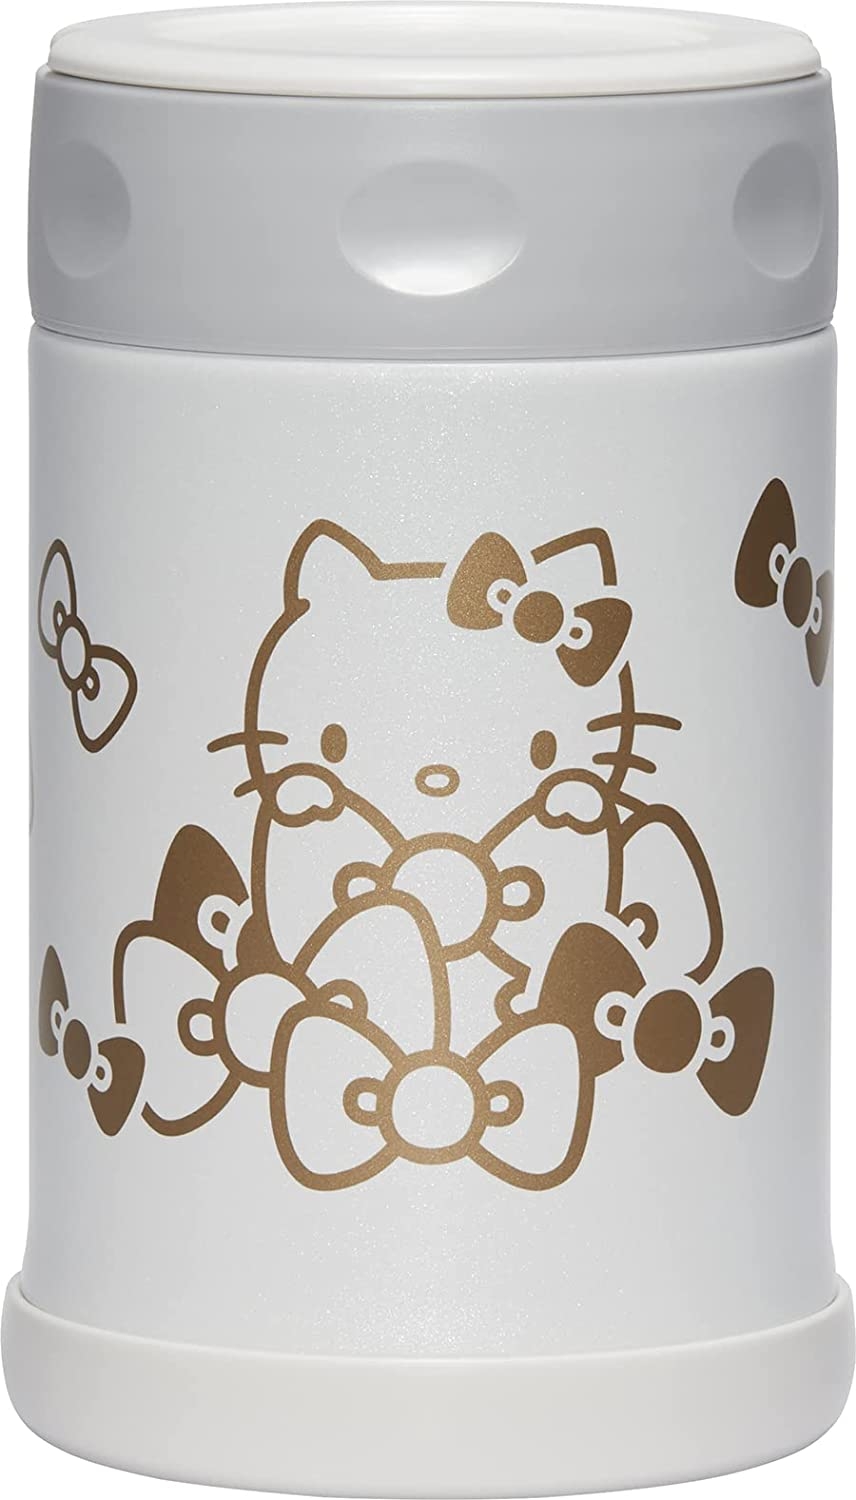 Zojirushi SW-EAE50KTWA Stainless Steel Food Jar, 17-Ounce, Hello Kitty Collection White Import To Shop ×Product customization